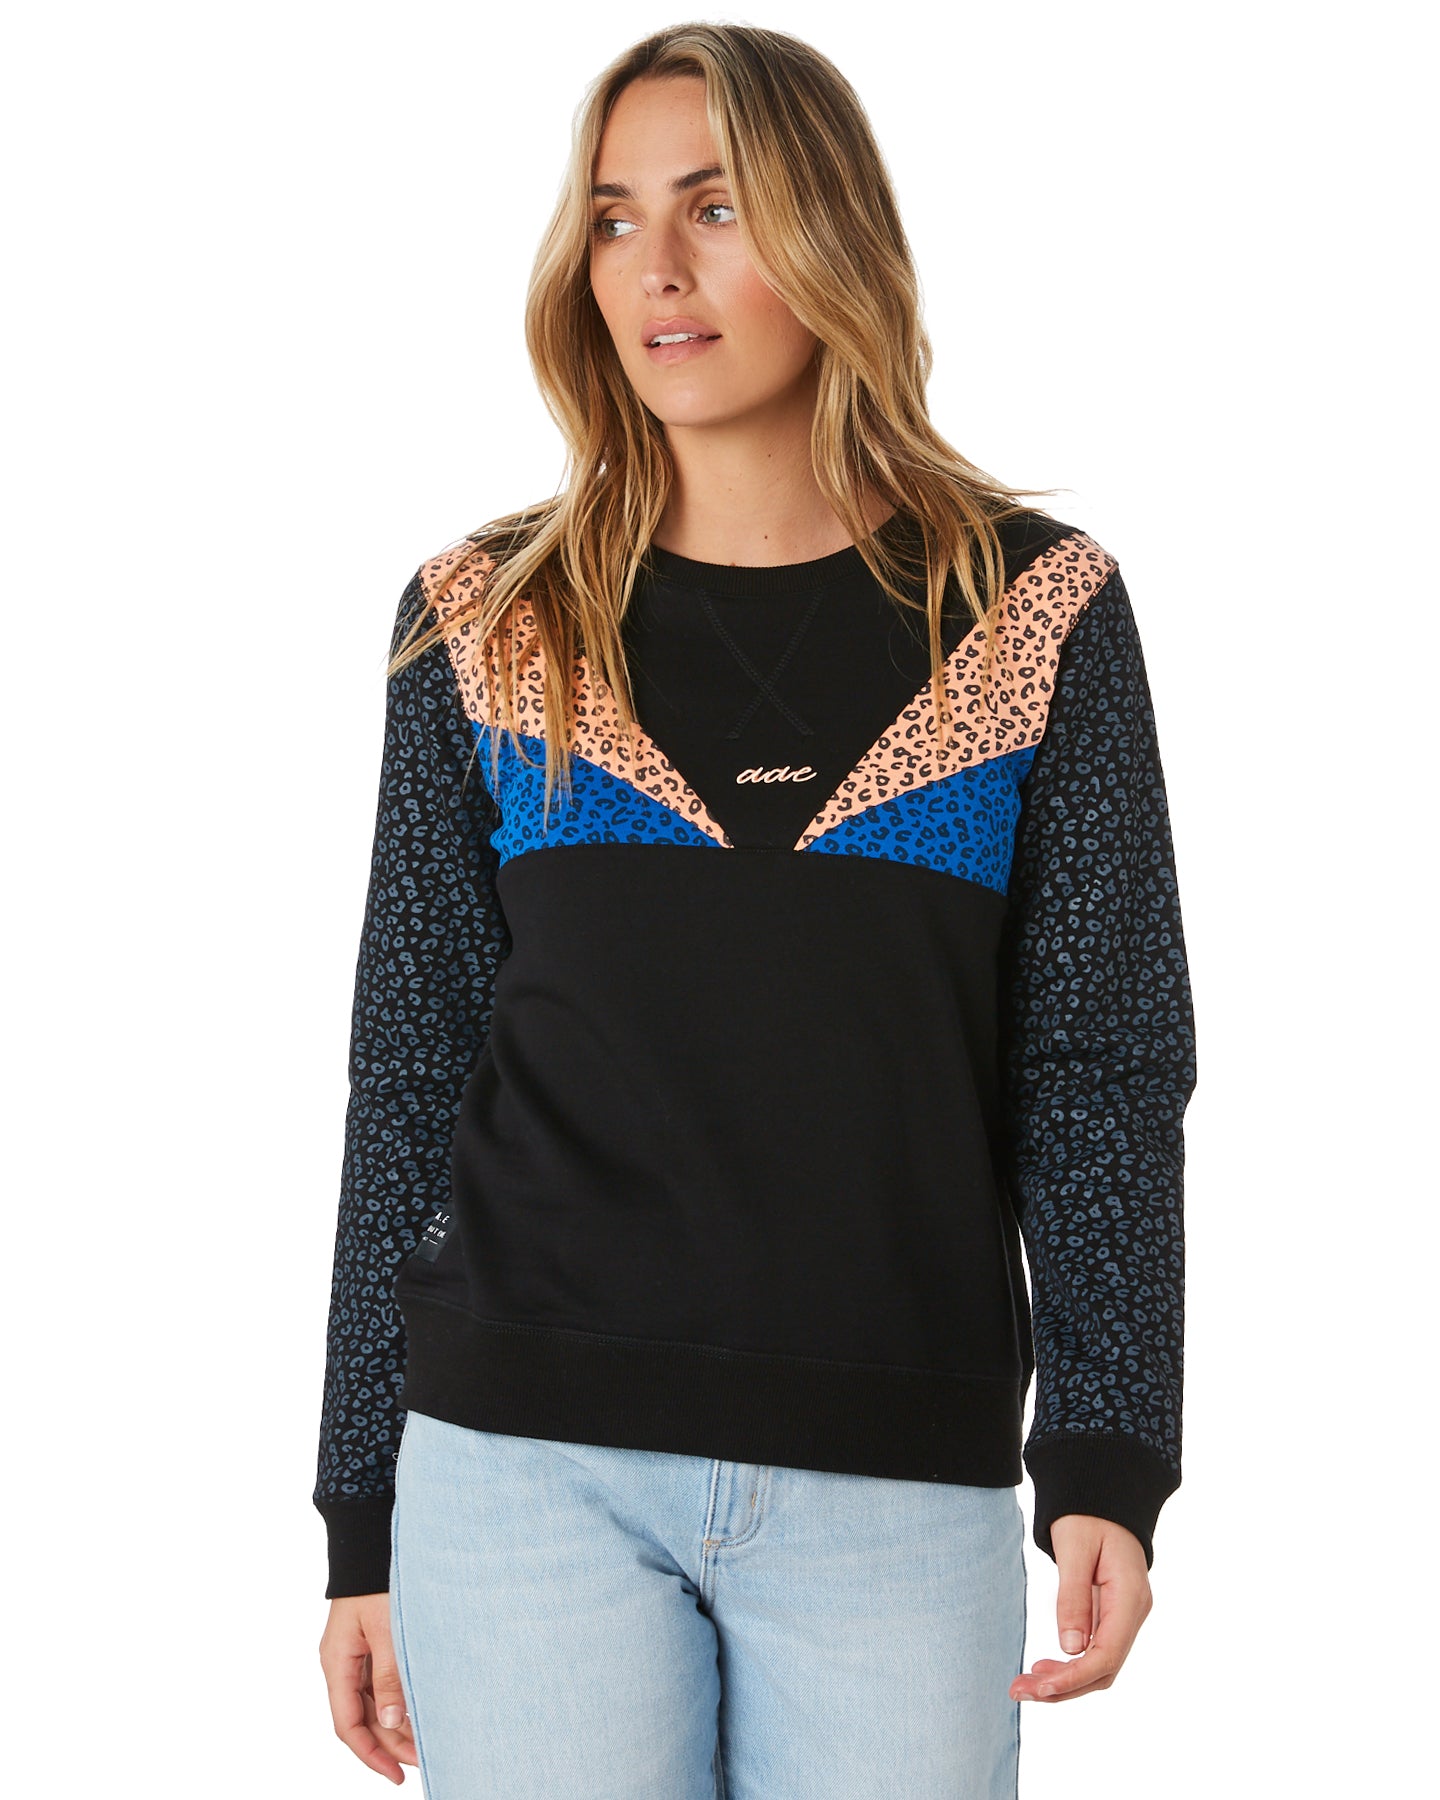 revival crew all about eve leopard print pink blue grey black warm winter crew jumper soft